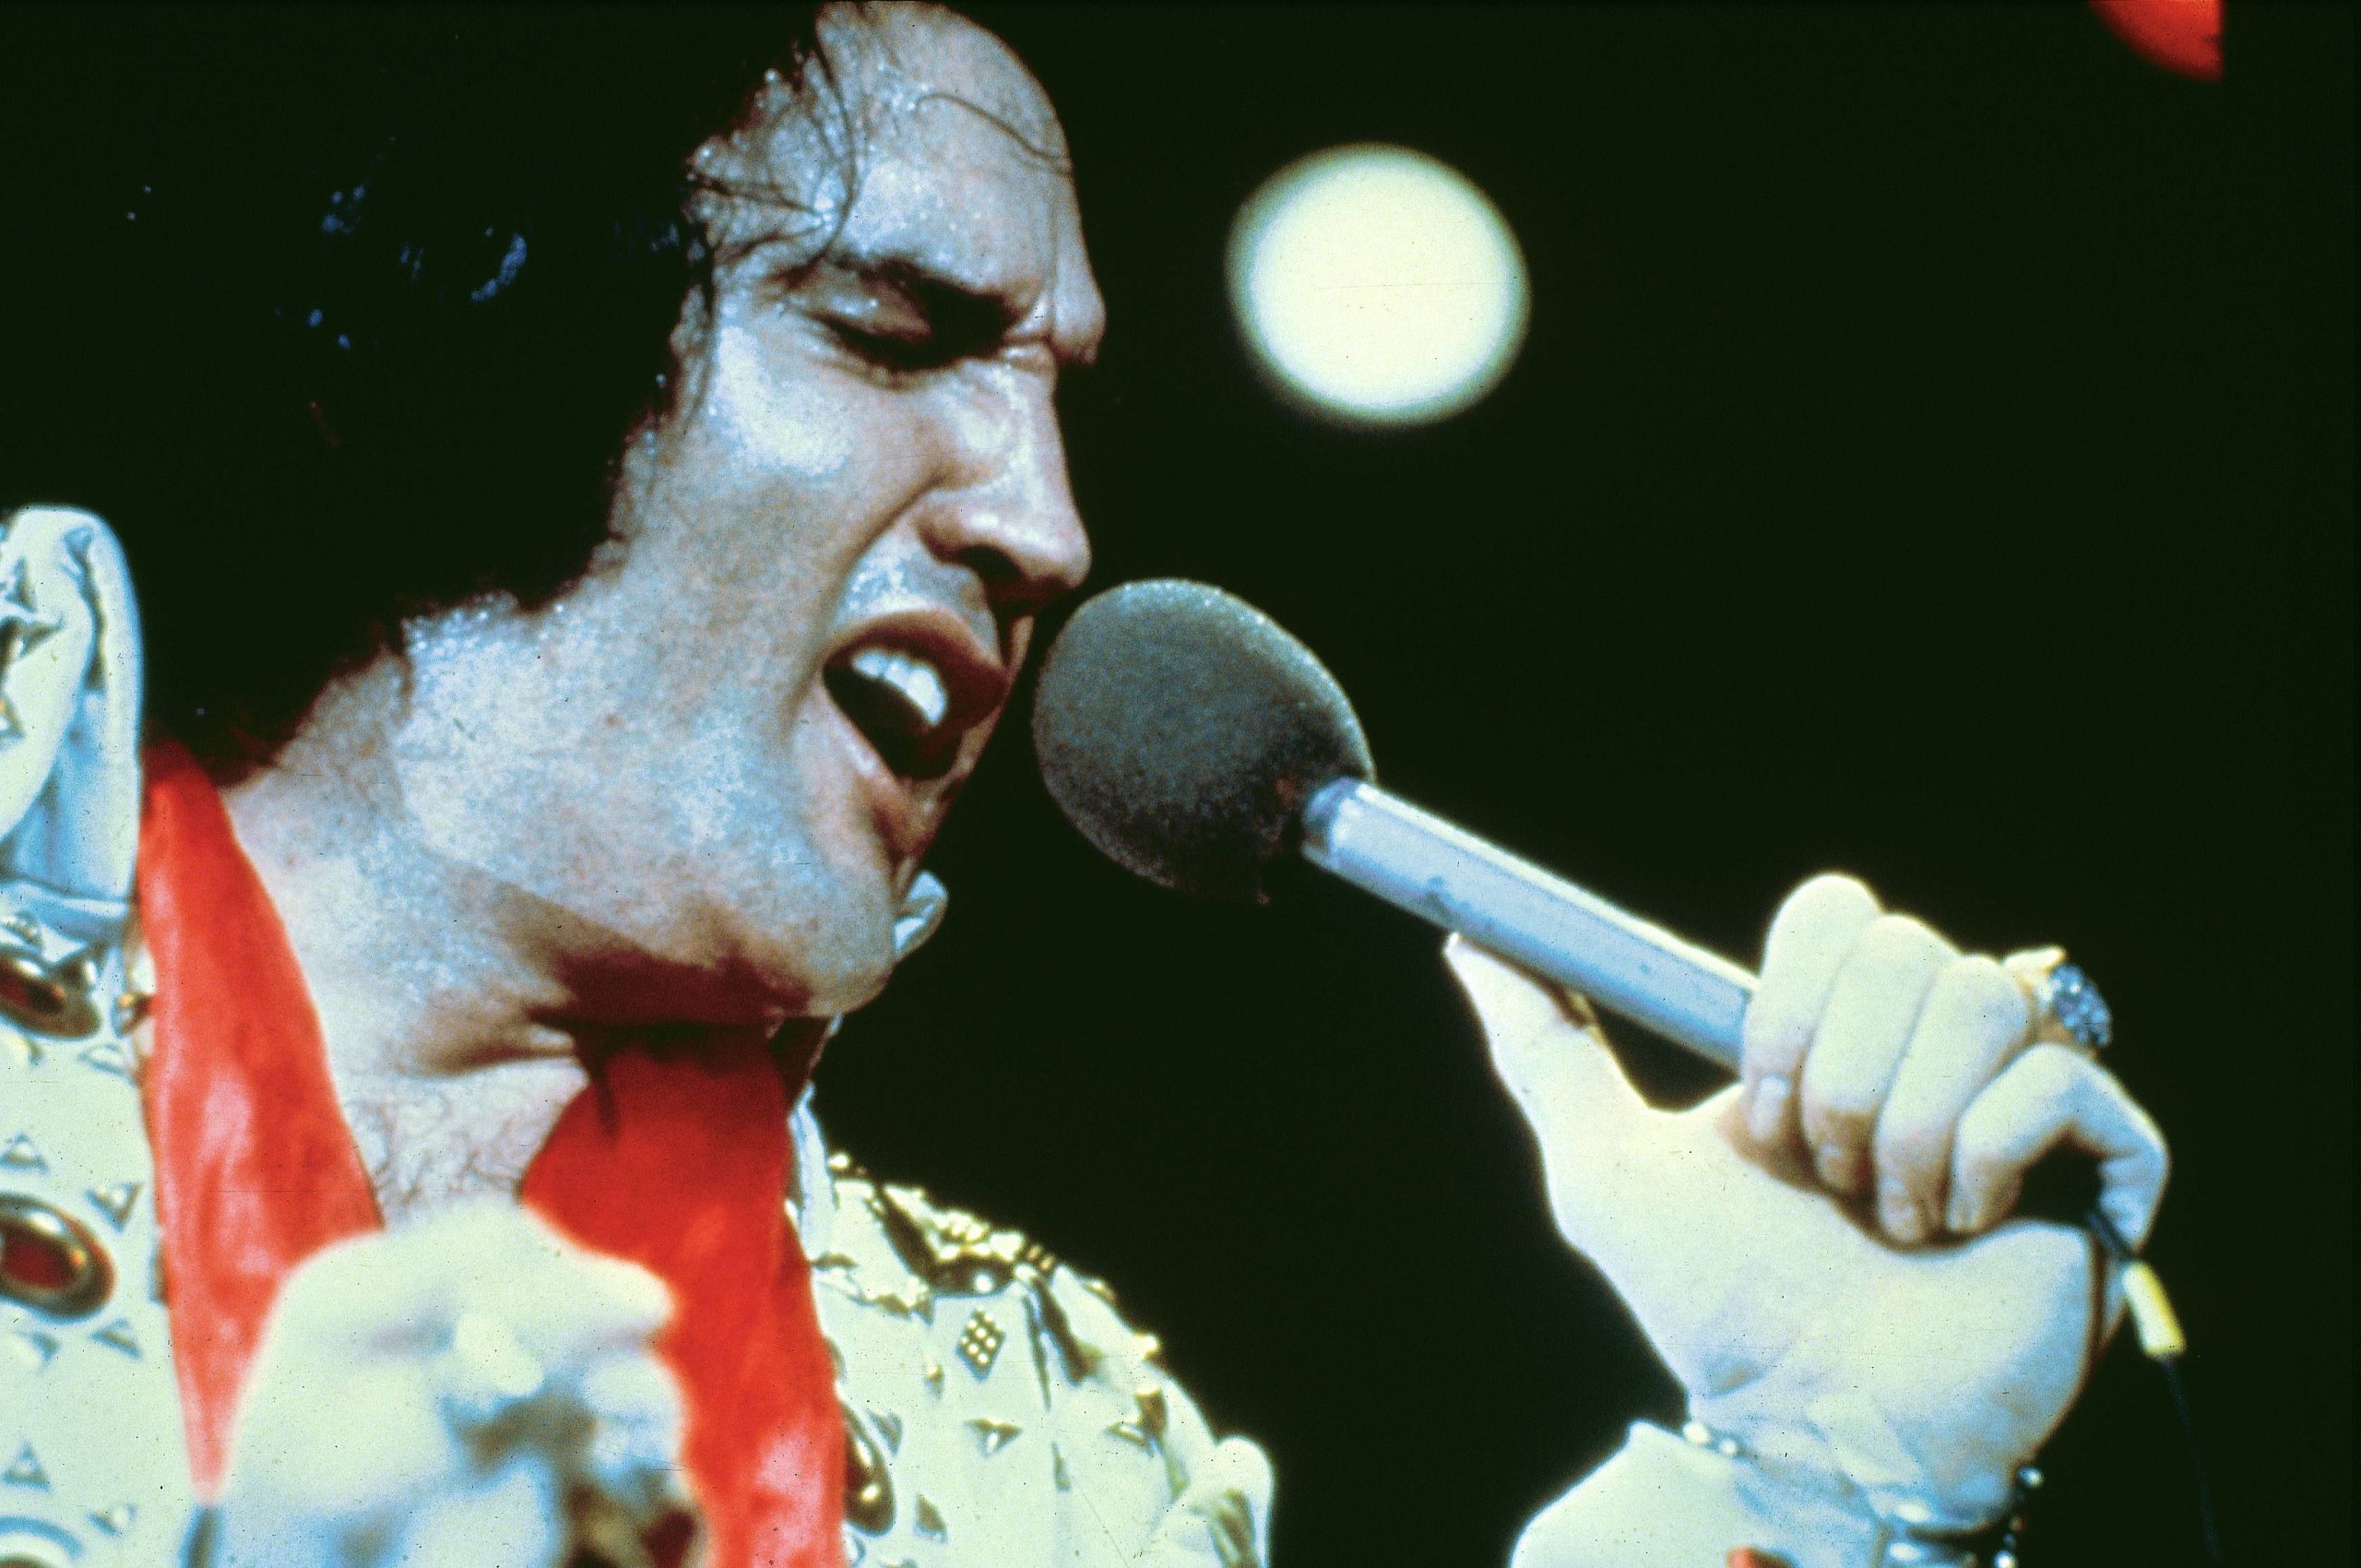 Elvis Presley’s Ex-Girlfriend Said He Was ‘Egocentric’ and ‘Gracious’